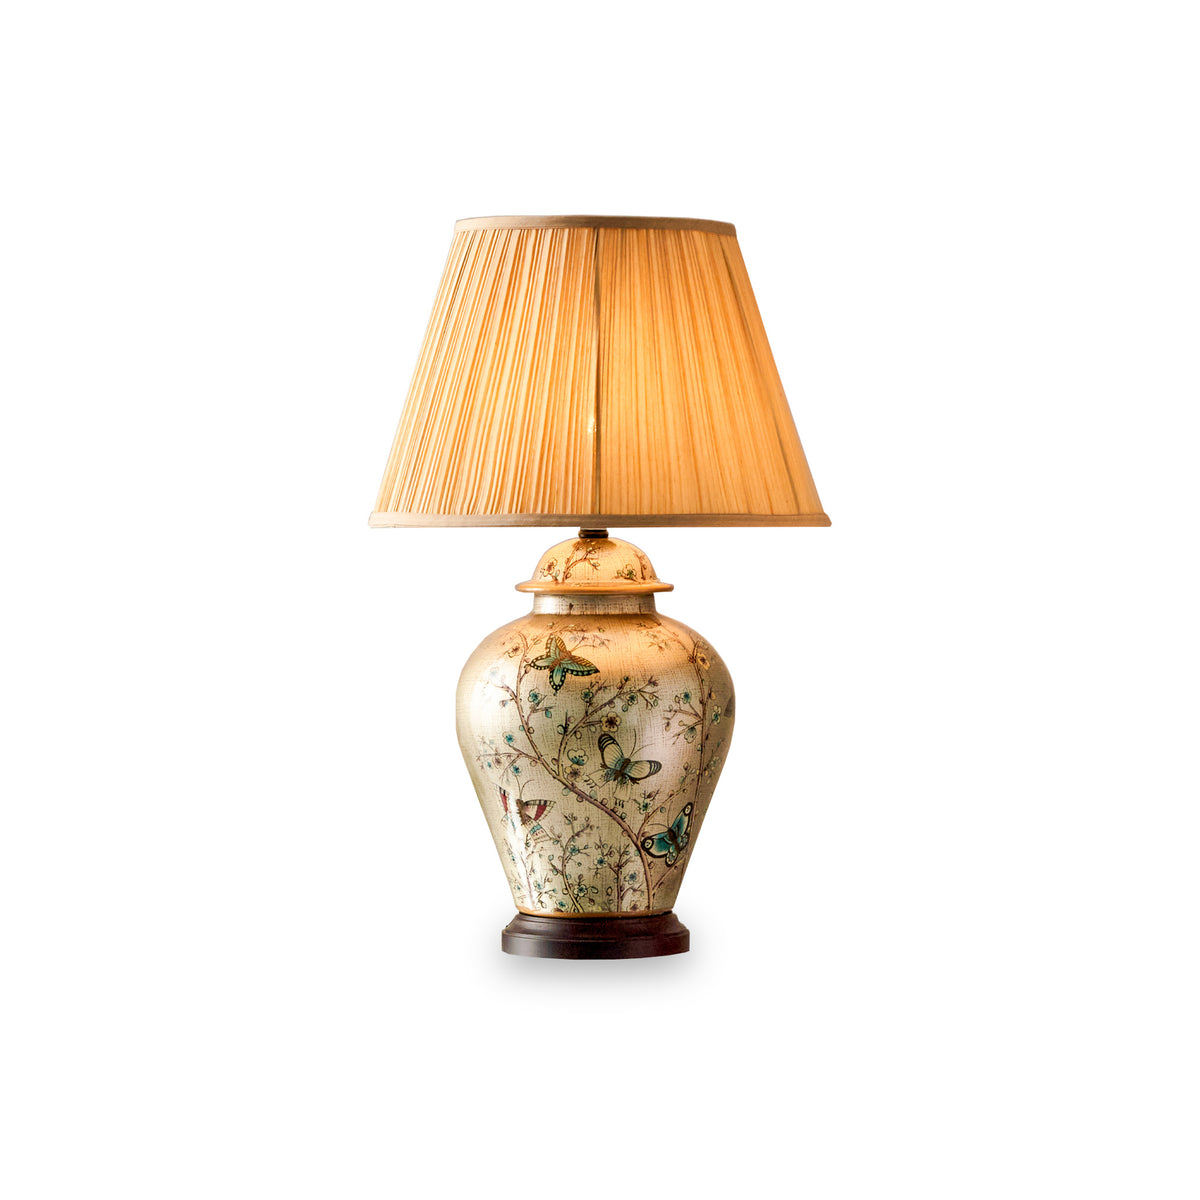 Papilion Butterfly Ceramic Table Lamp with Wooden Base from Roseland Furniture